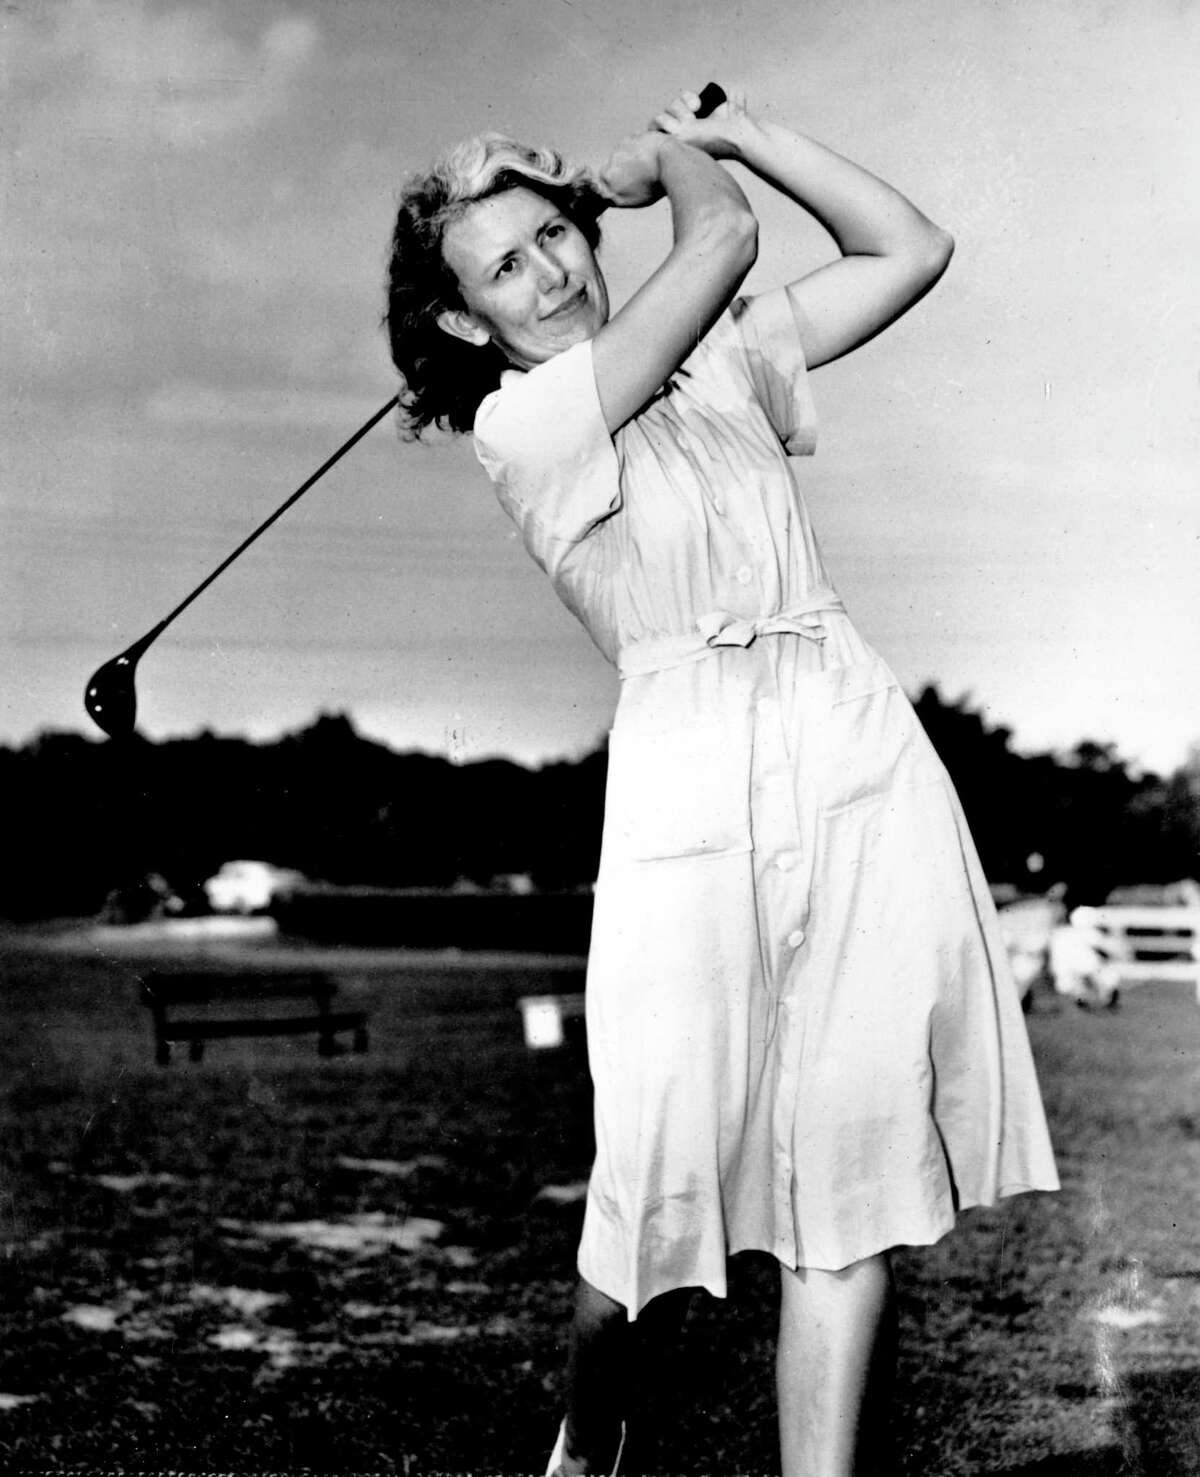 ** FILE ** In this June 1947, file photo, Betty Jameson displays a practice swing prior to the third round play in the Women's U.S. Open Golf Tournament at Starmount Forest Country Club in Greensboro, N.C. Jameson won the 72-hole tourney with a 295 total. Jameson, one of the 13 founding members of the LPGA Tour in 1950, died Saturday. She was 89. (AP Photo, File)